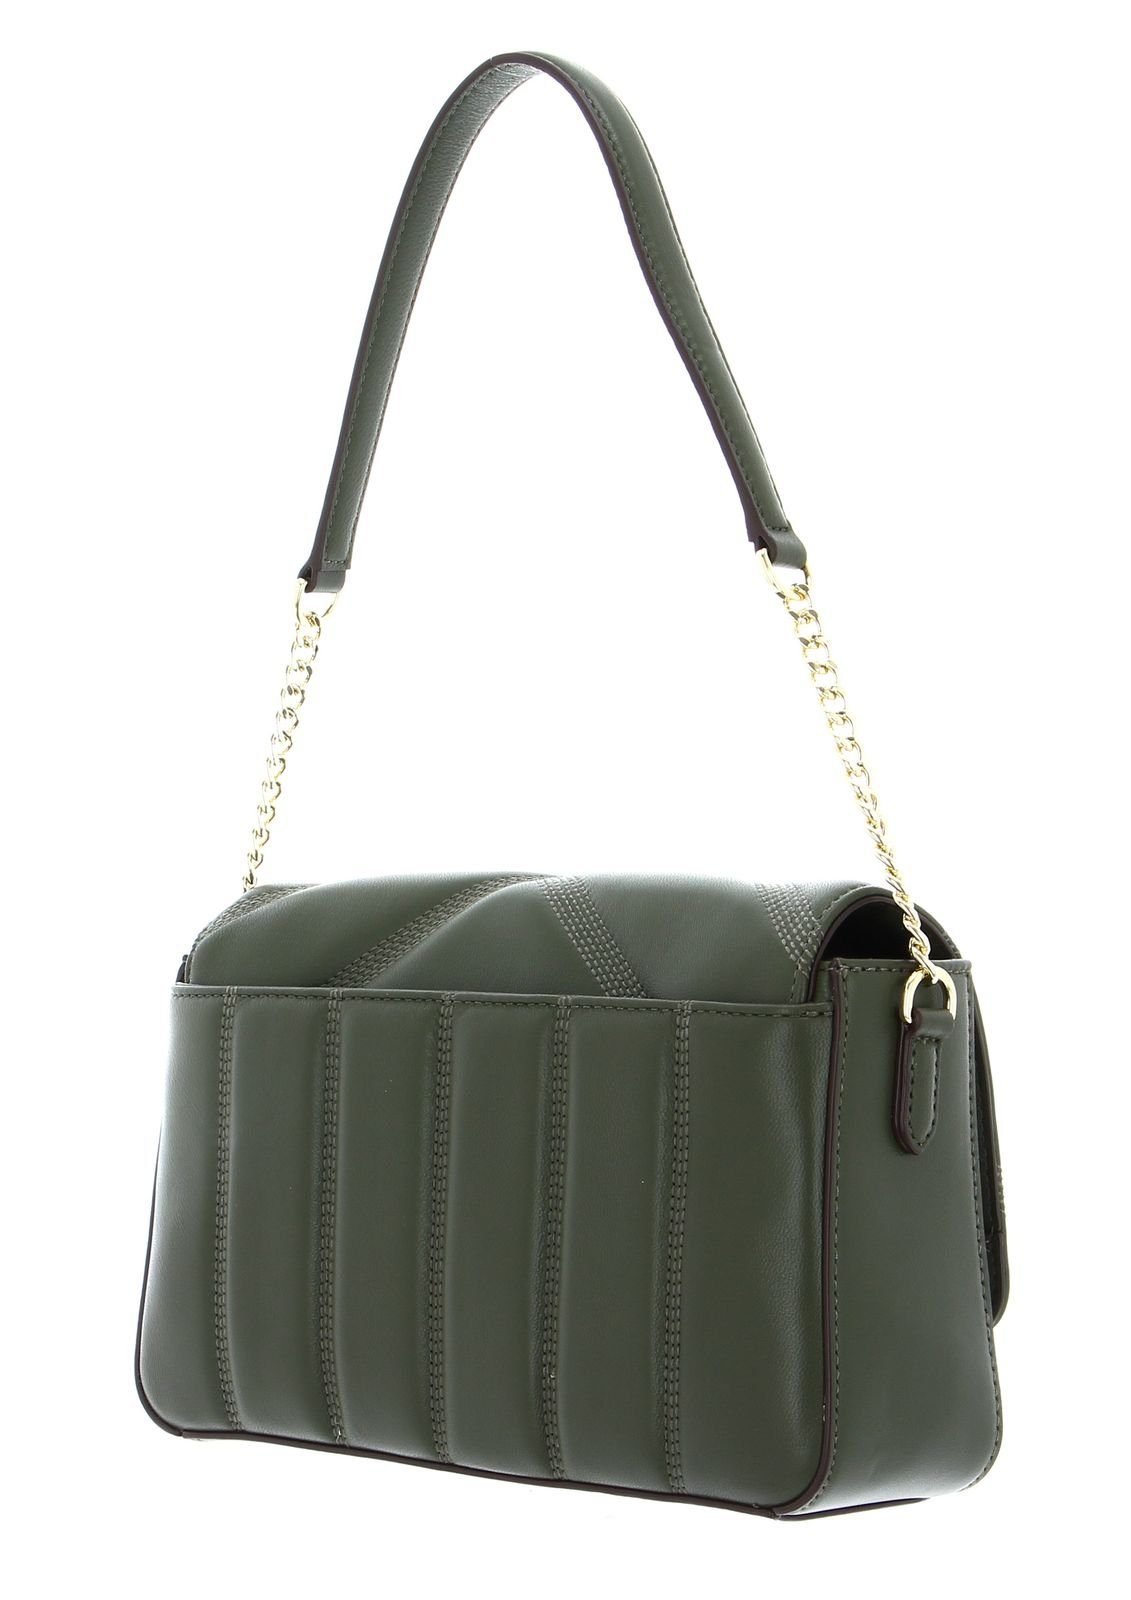 Green Army Schultertasche DKNY Becca